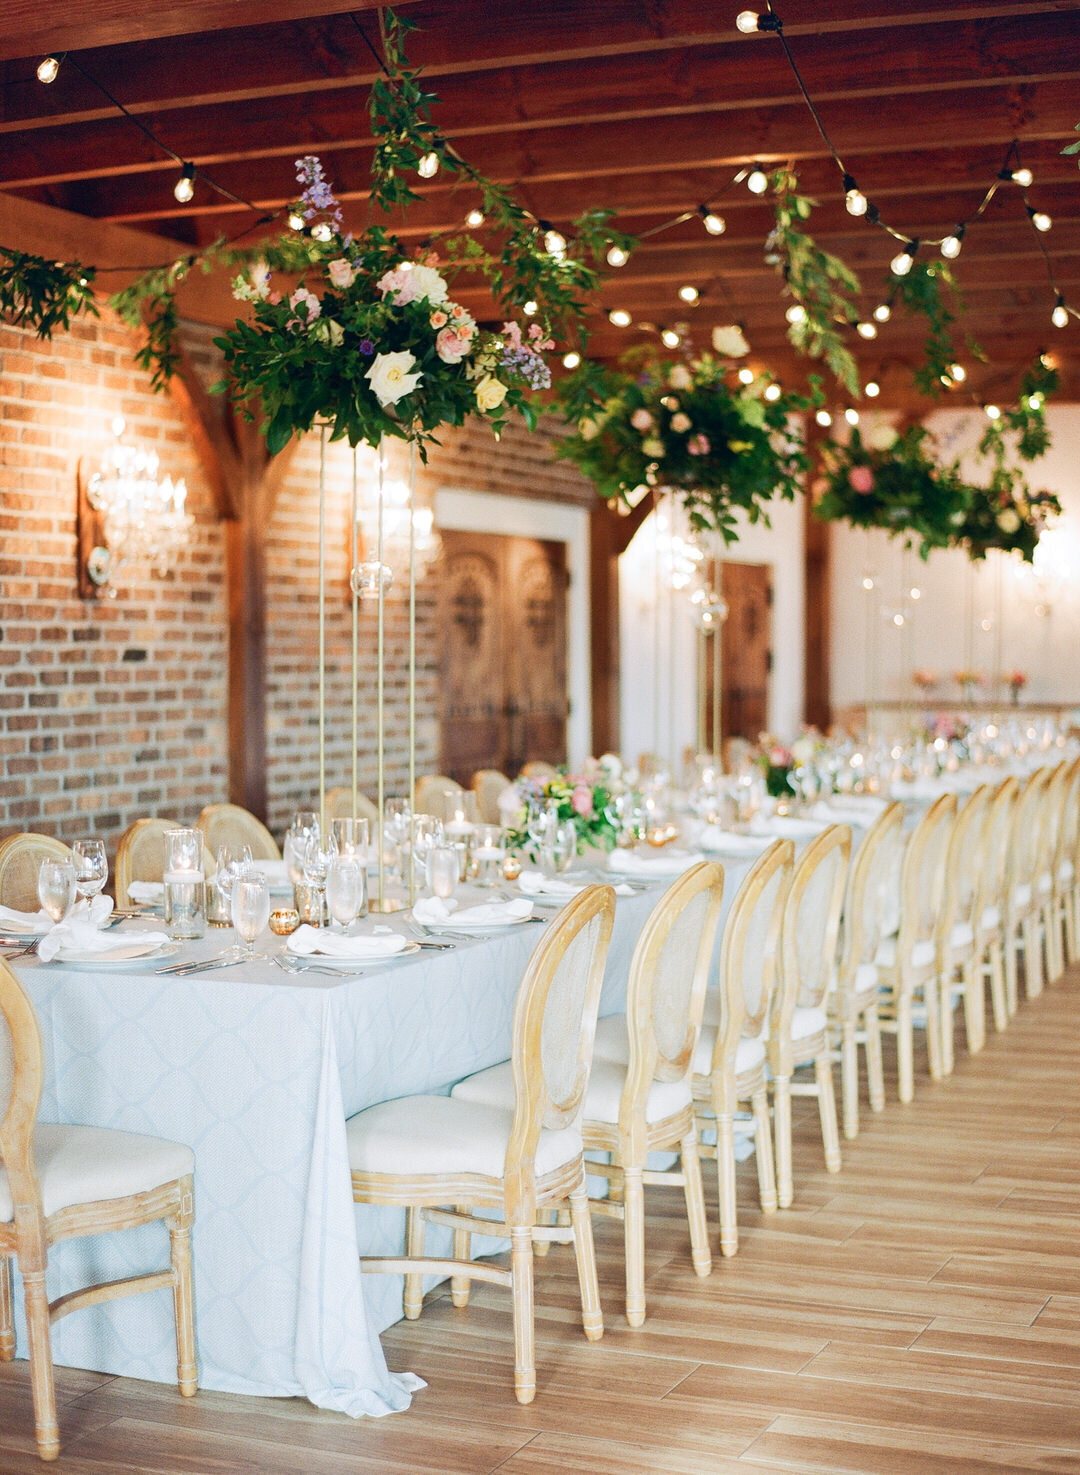 wedding reception head table with flowers and candles